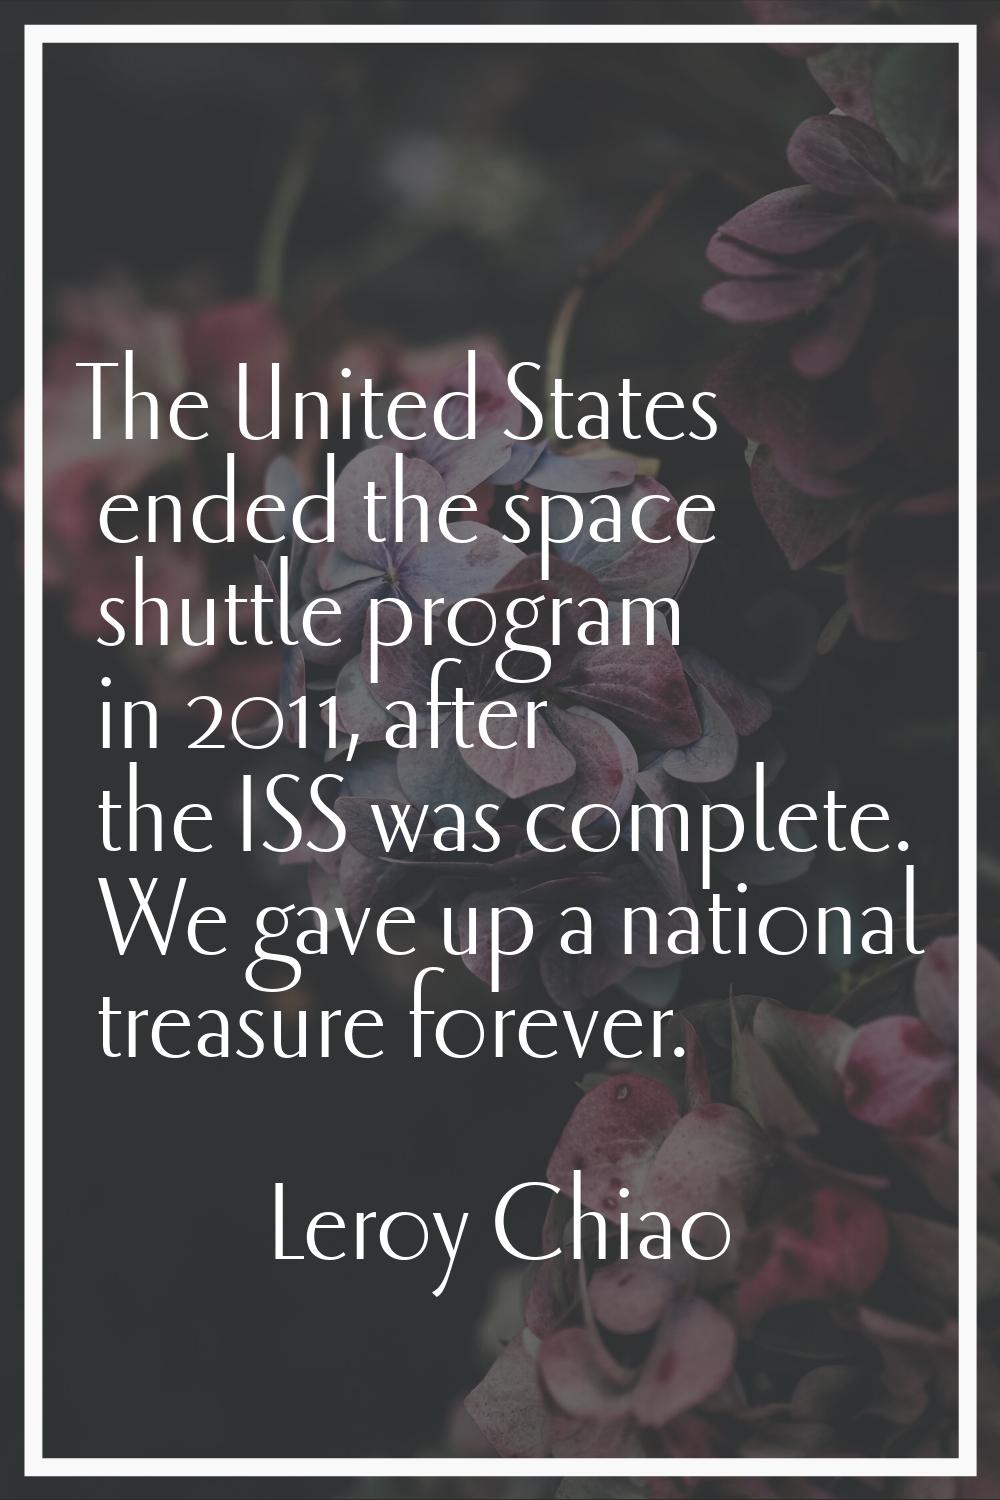 The United States ended the space shuttle program in 2011, after the ISS was complete. We gave up a